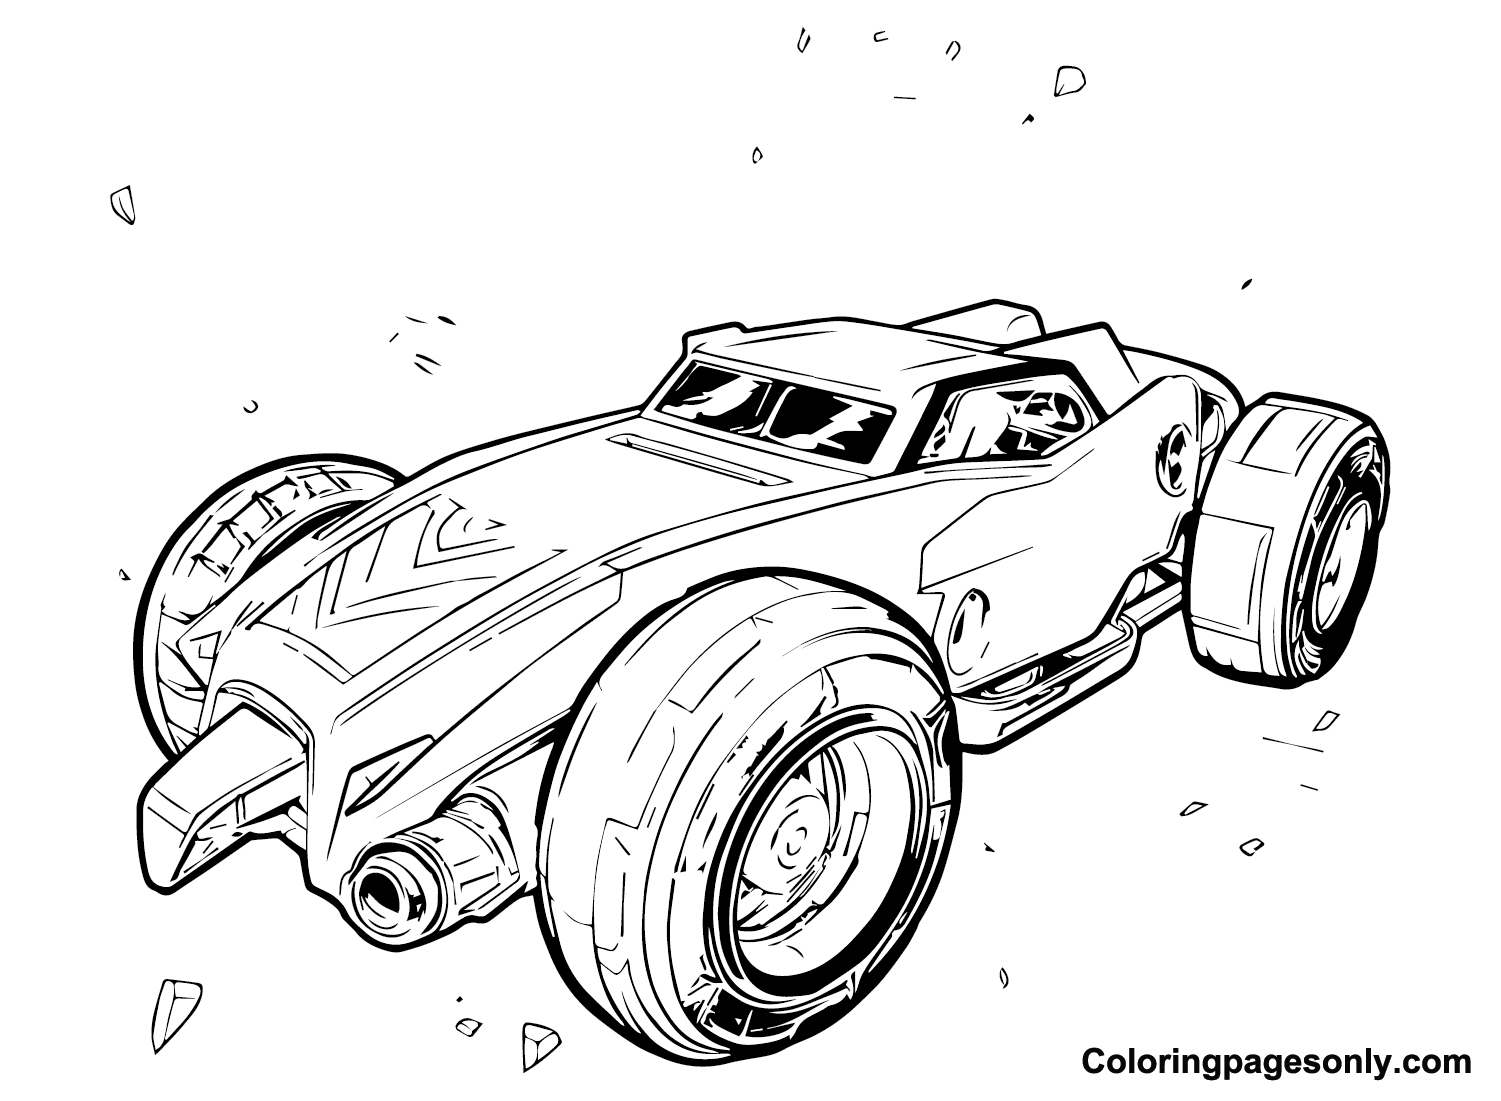 Rocket league drawing coloring page